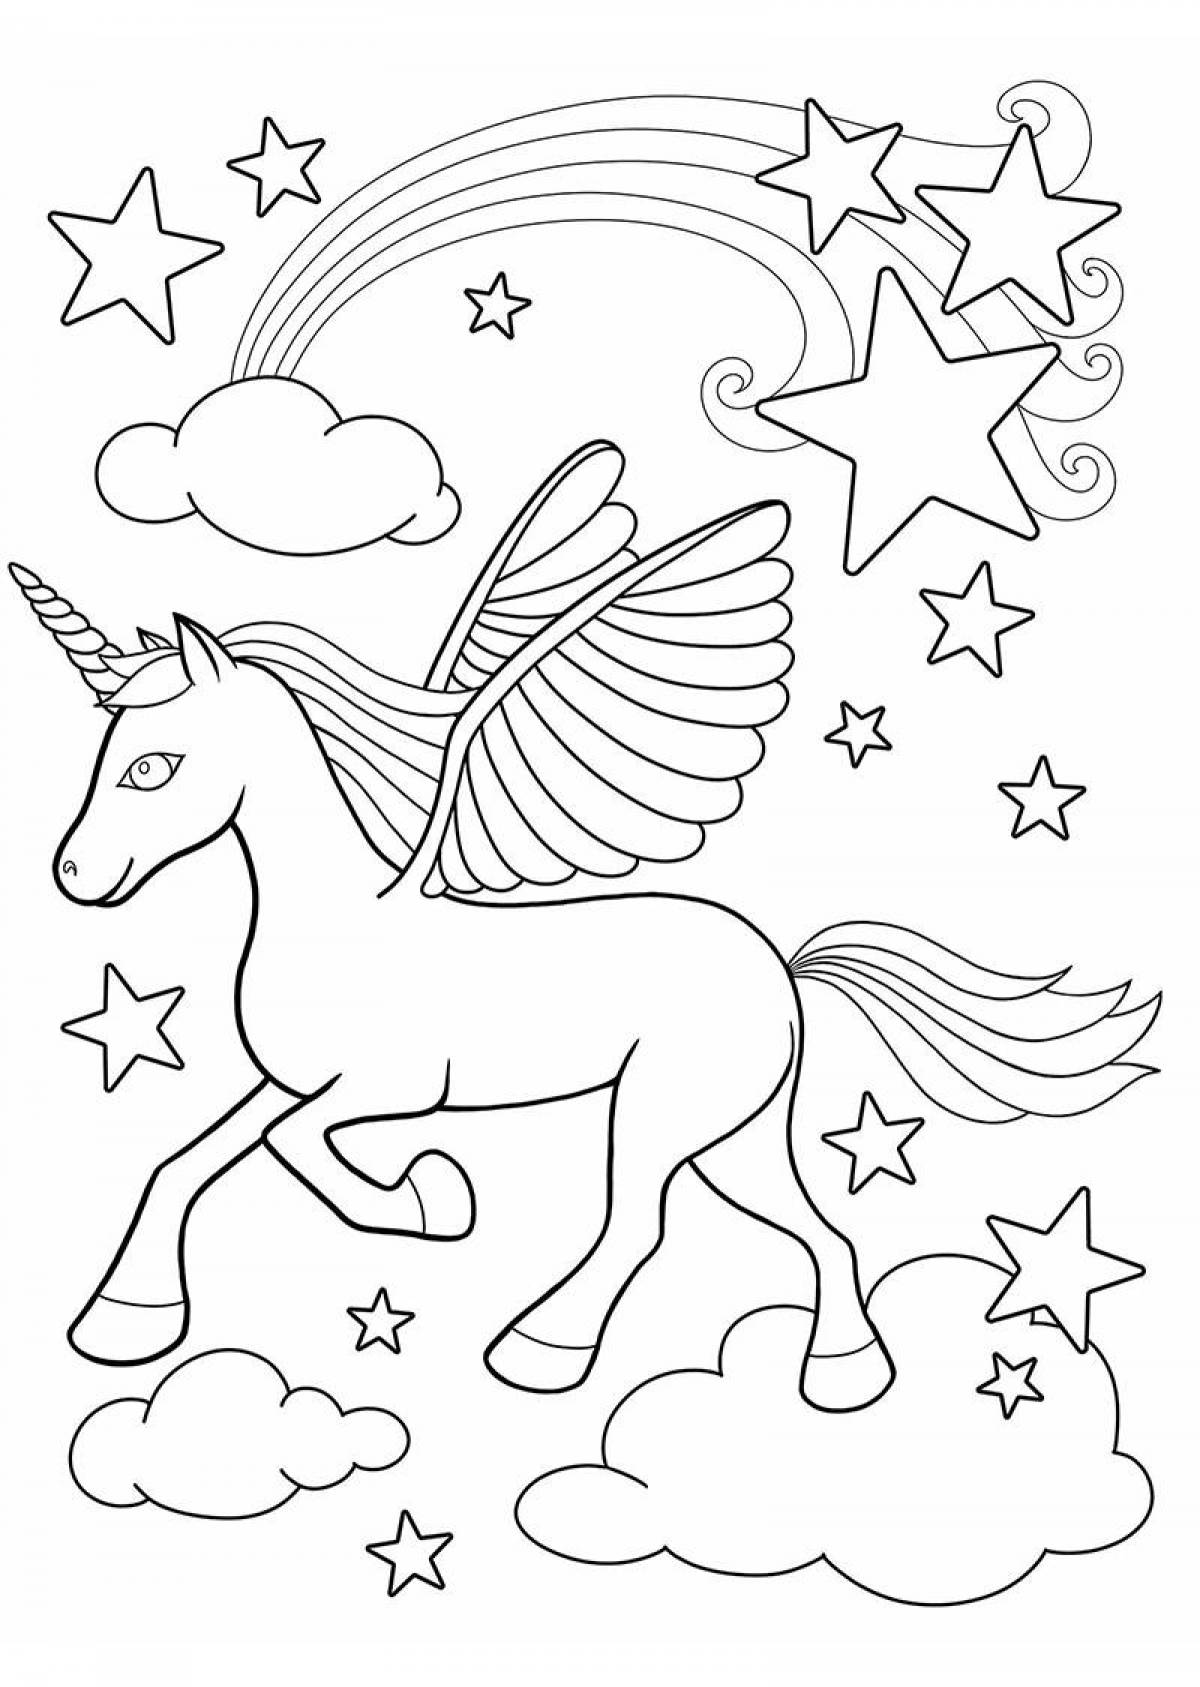 Coloring pages unicorns for girls